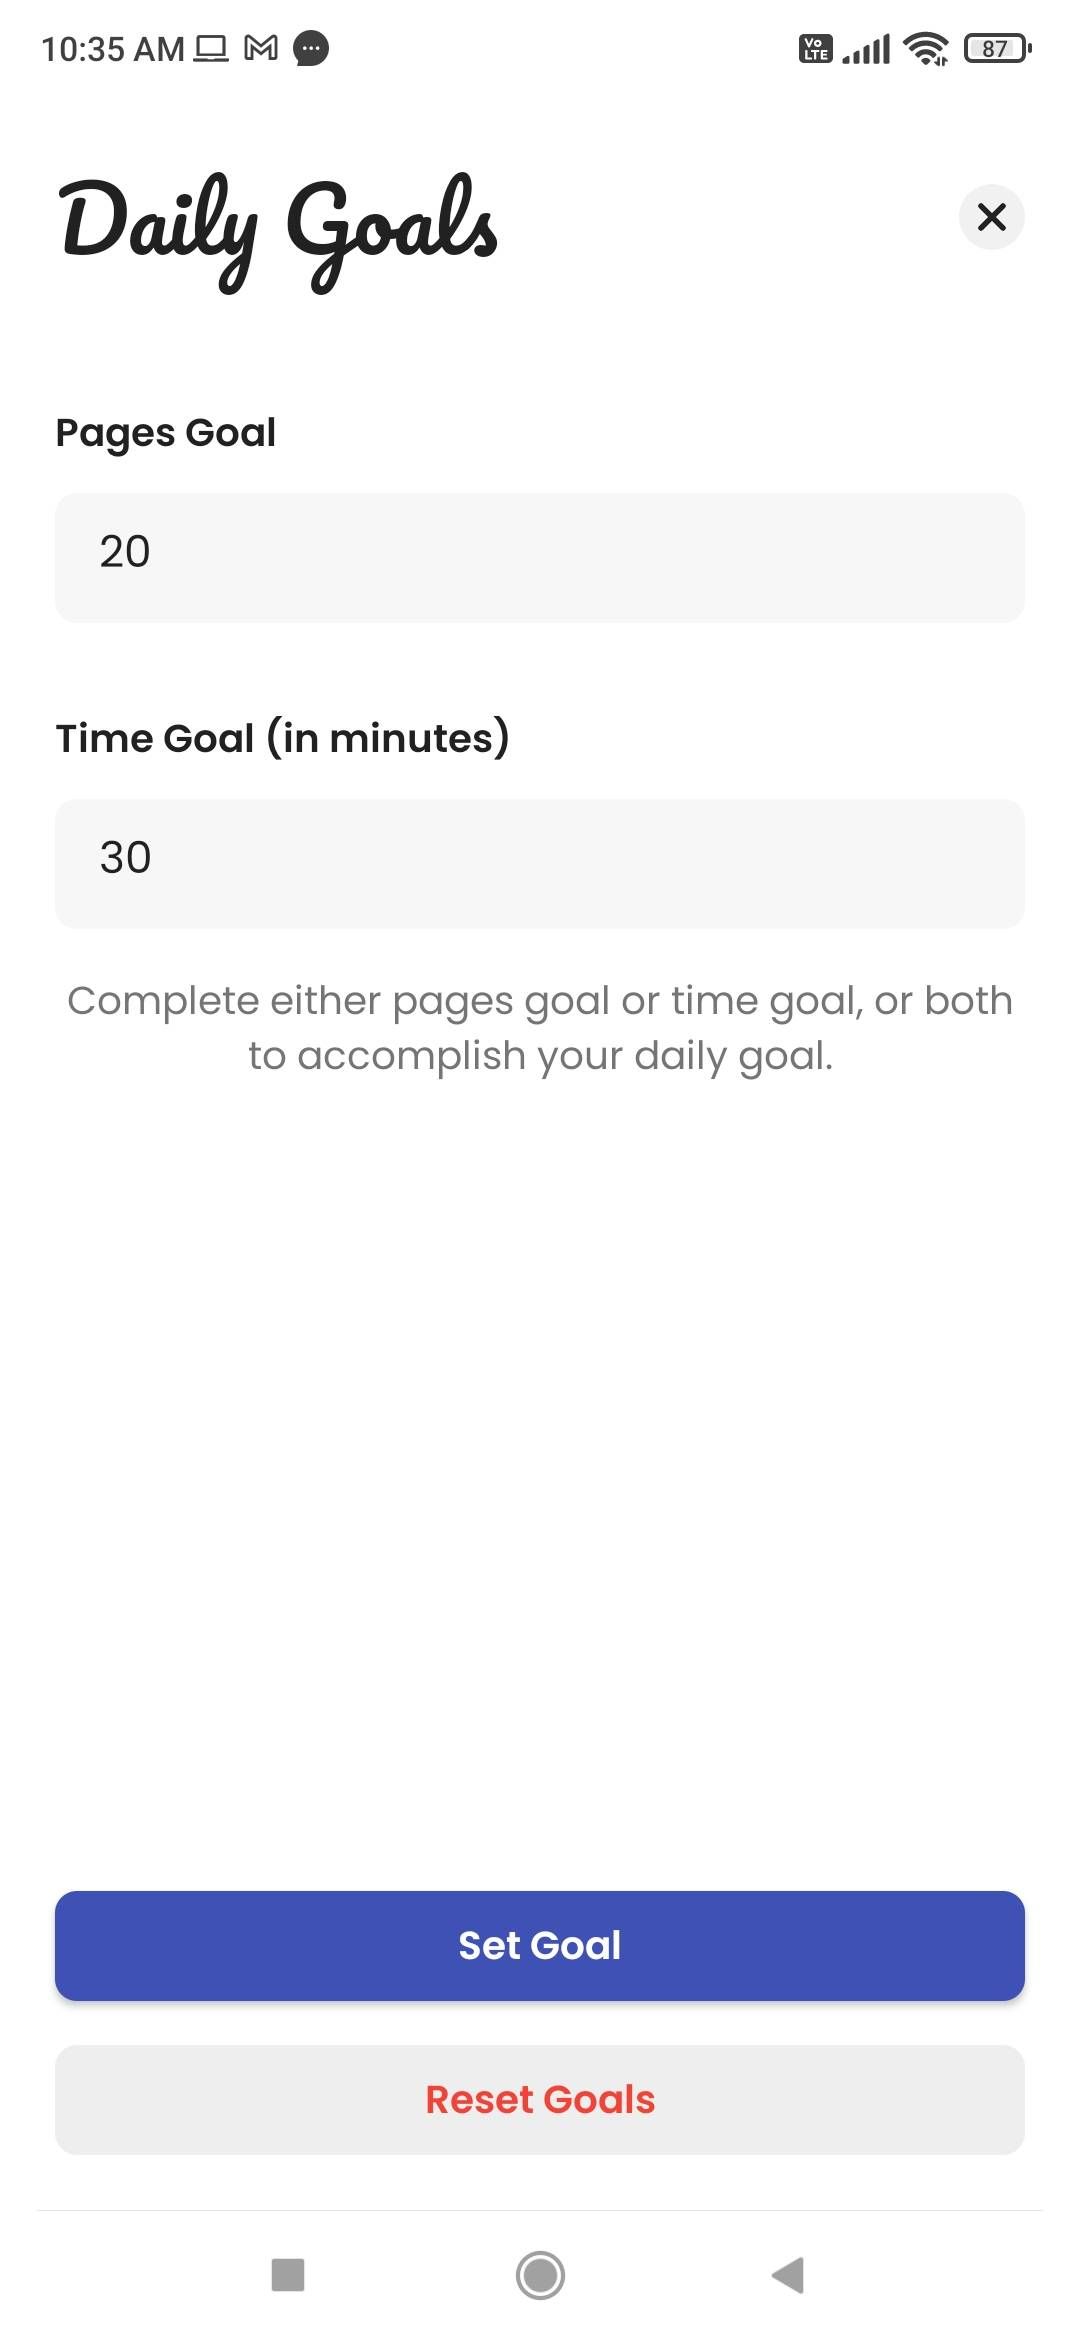 Read More for Android is an excellent free app to set reading goals and track them.